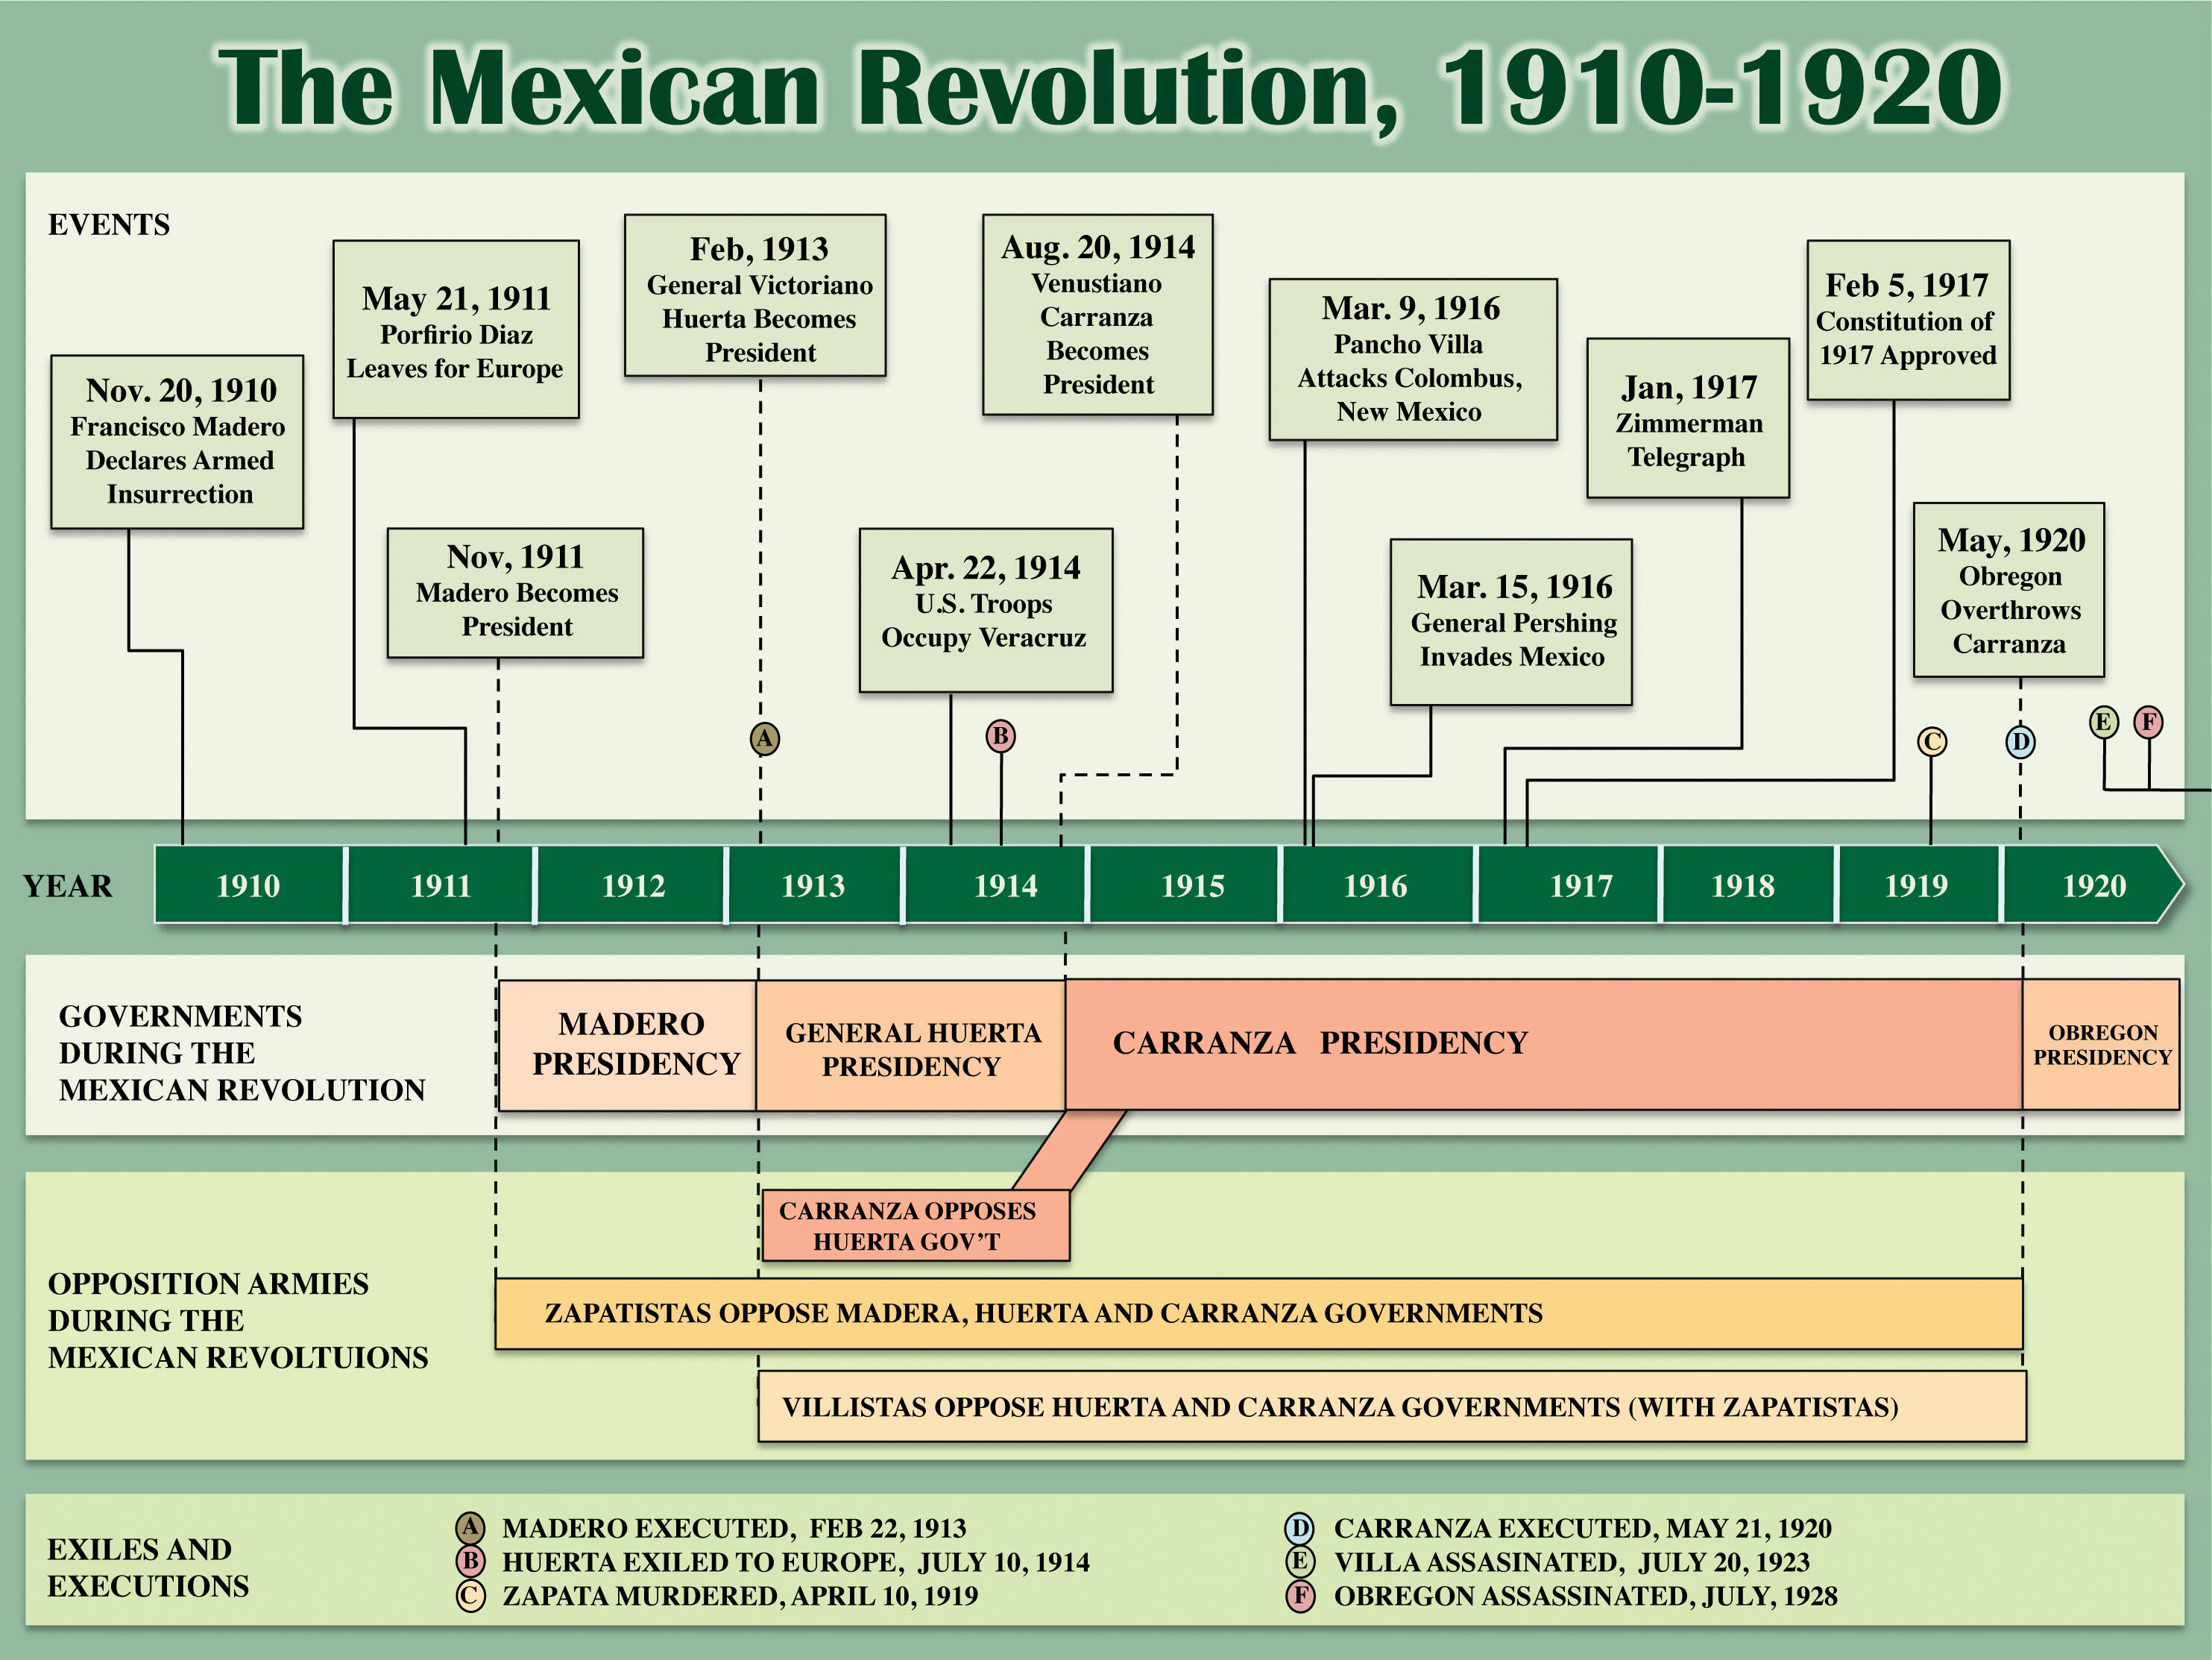 MEXICO'S CENTENNIALS The Promise and Legacy of the Mexican Revolution